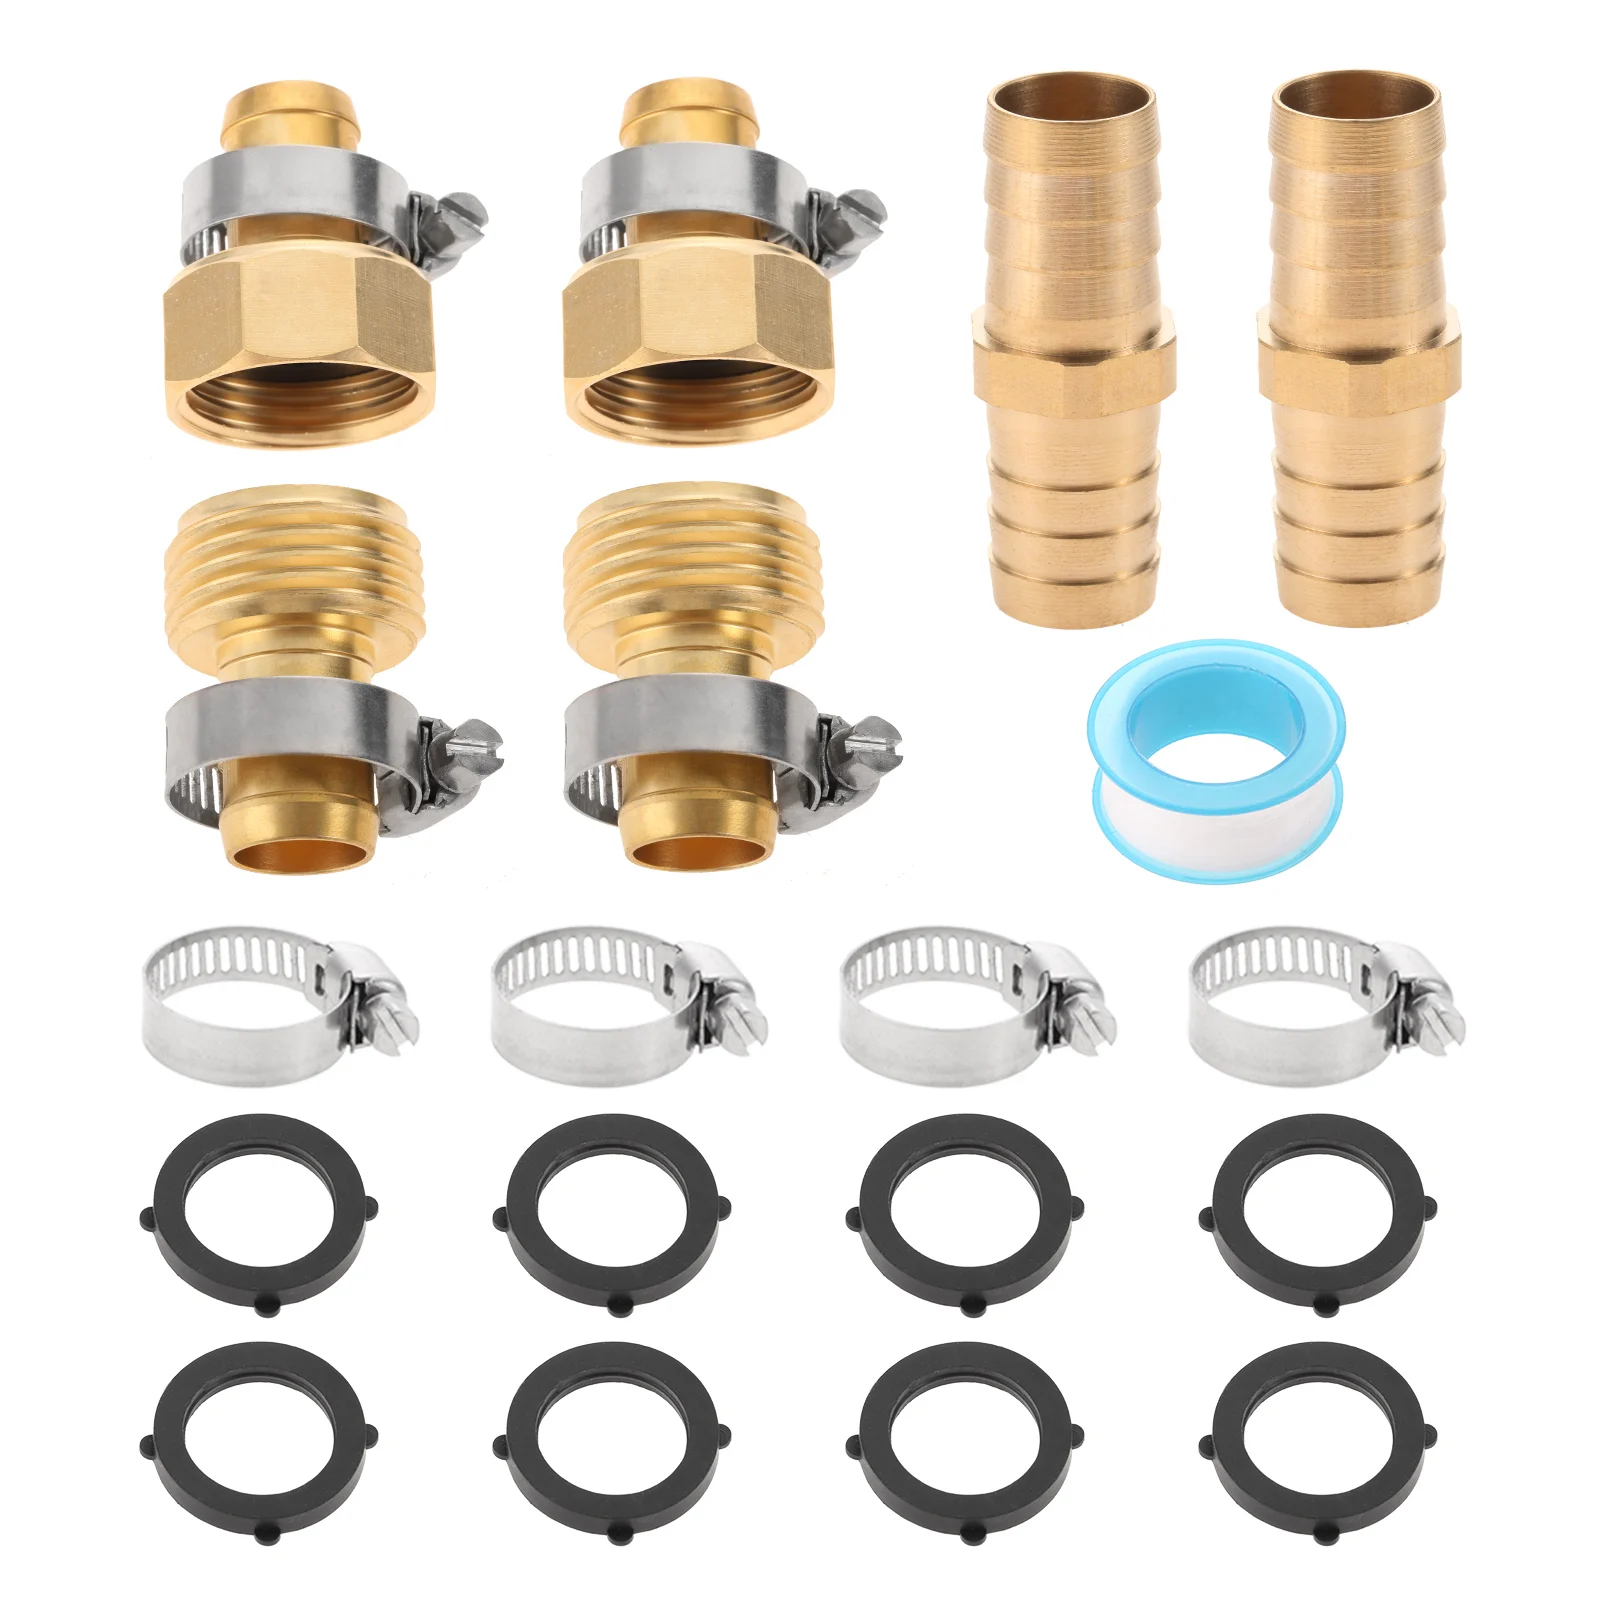 

4kits Garden Hose Connector Solid Brass Mender 3/4 5/8 1/2 Inch Female & Male Tape Steel Clamp Rubber Gasket Durable Parts